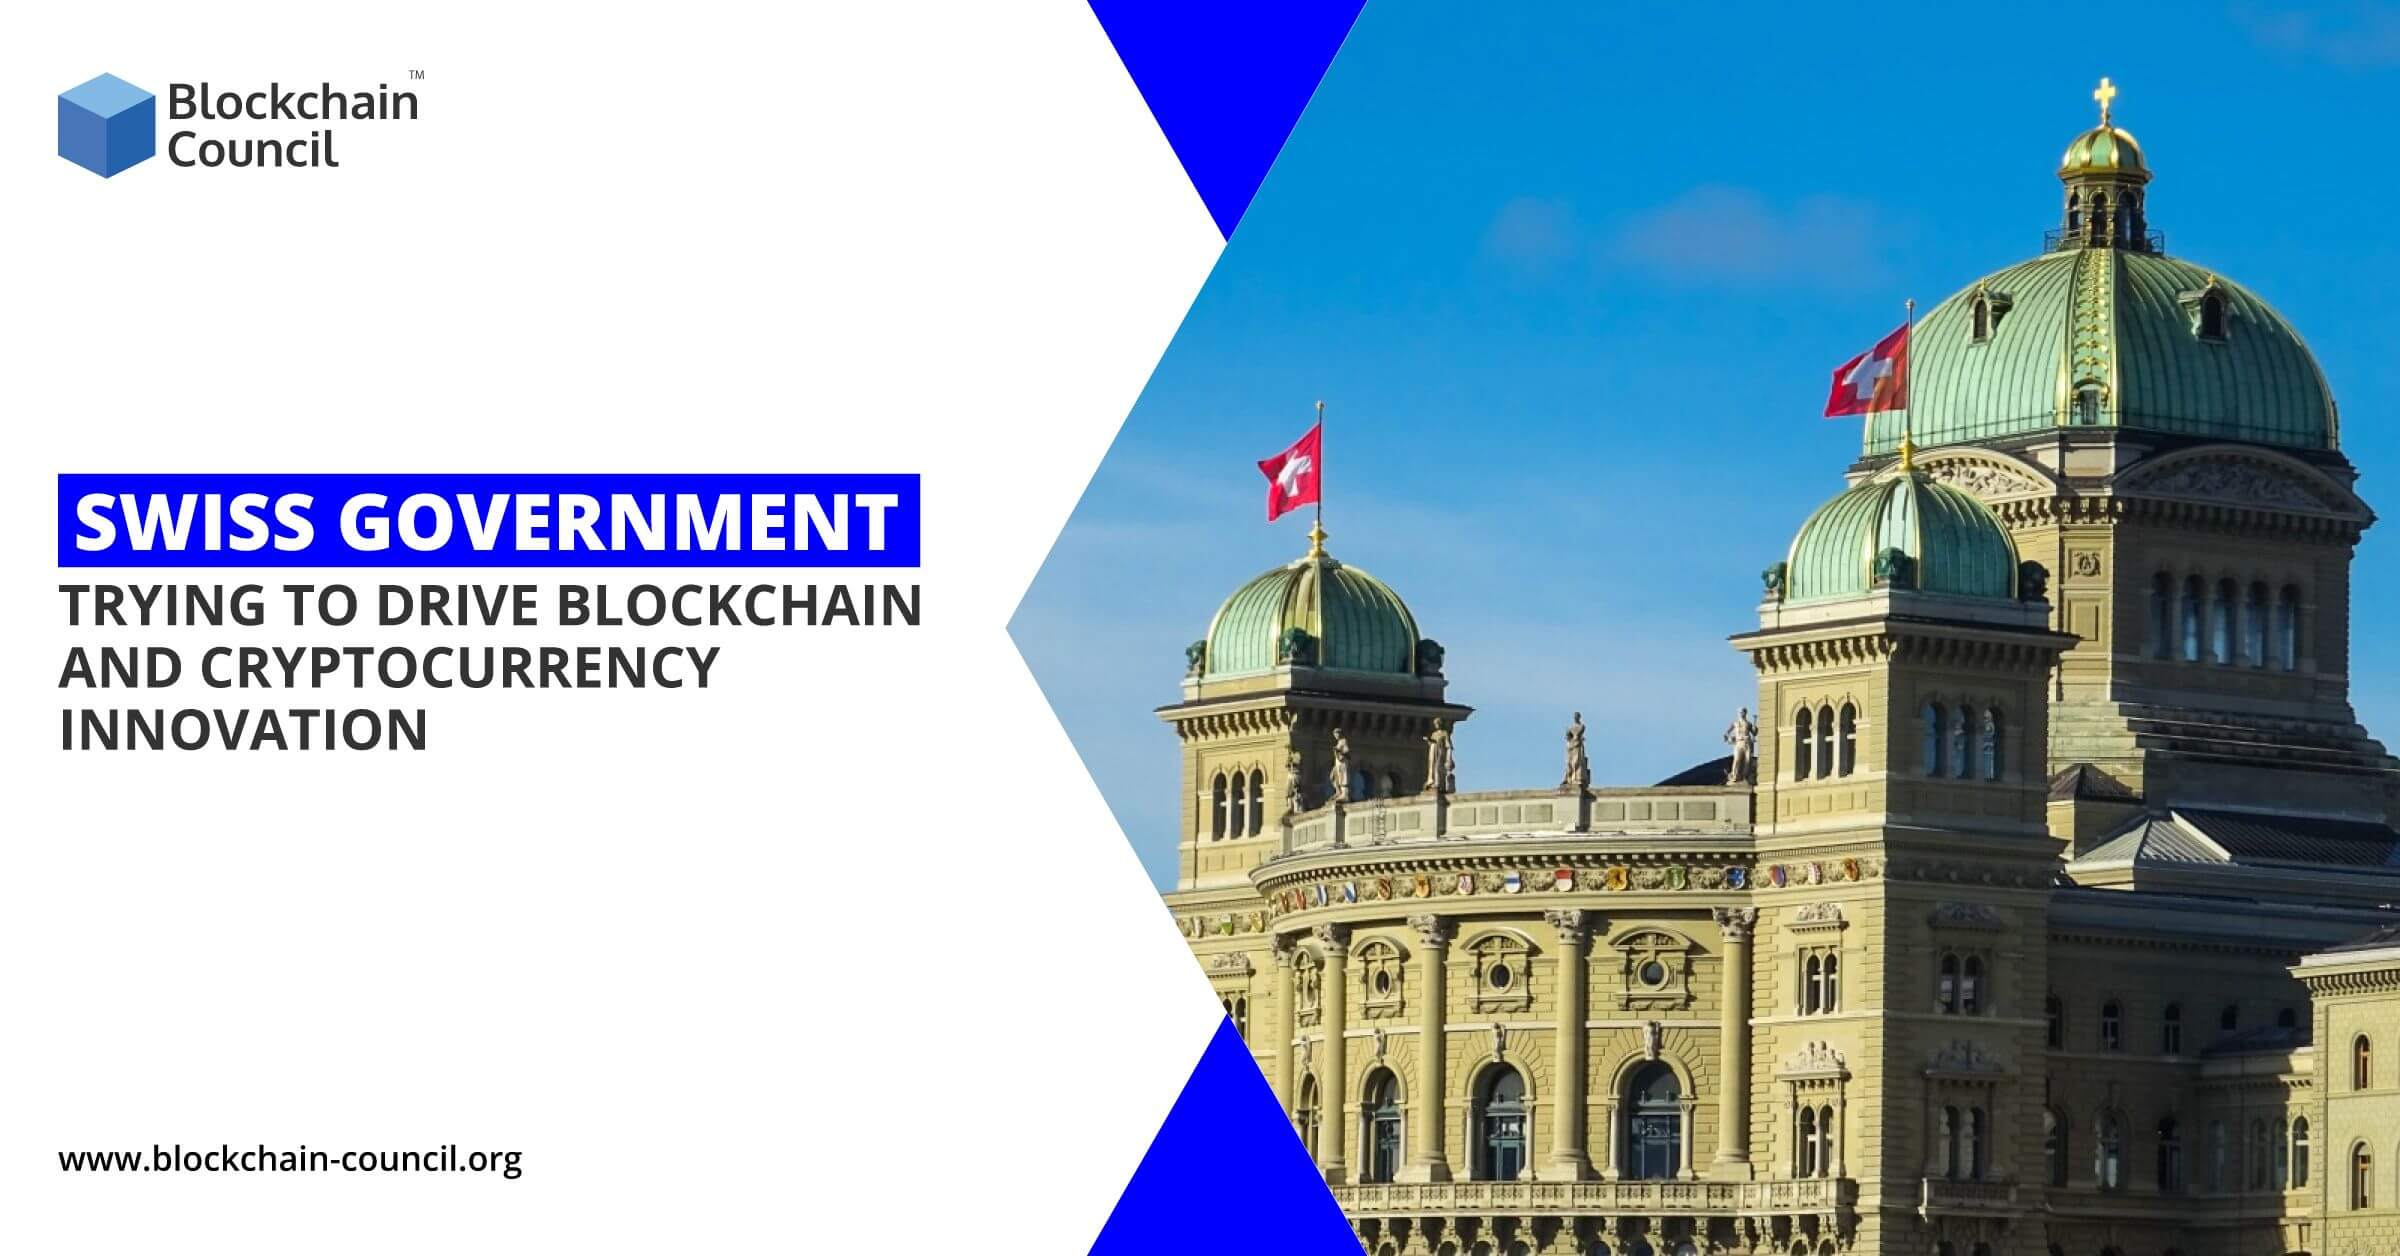 Swiss Government Trying to Drive Blockchain and Cryptocurrency Innovation